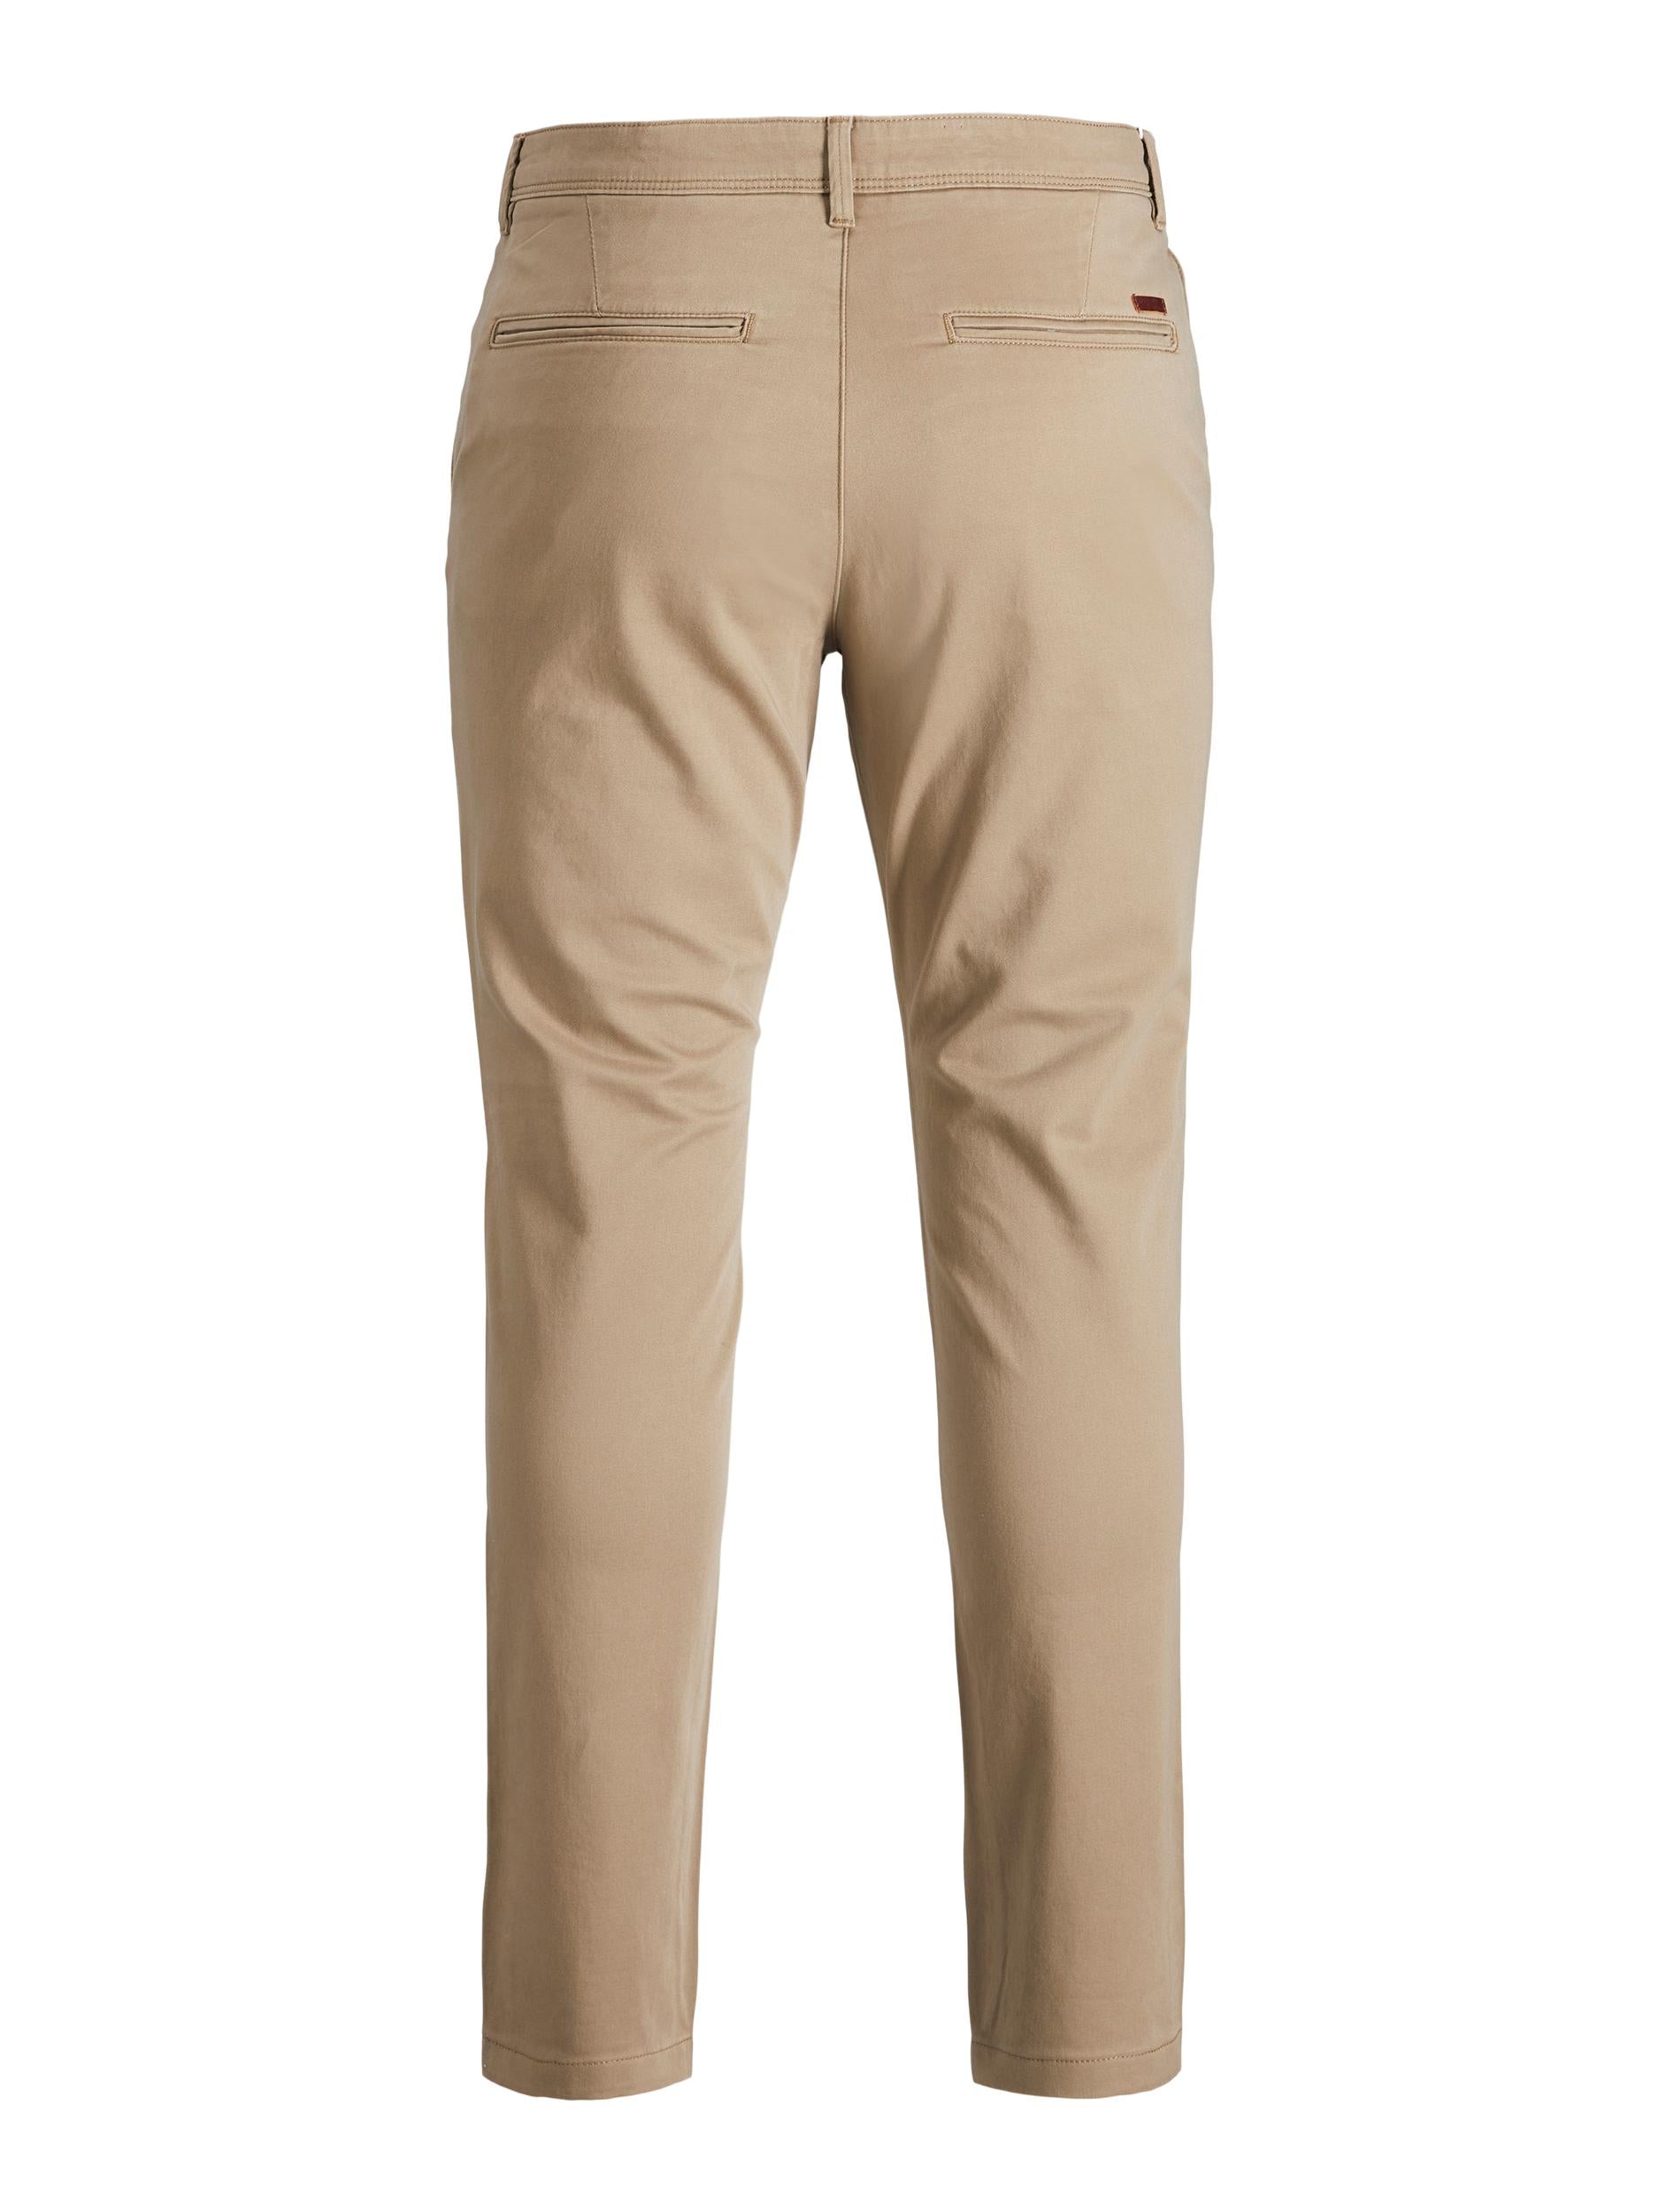 Marco Bowie Mens Beige Chino-Back View